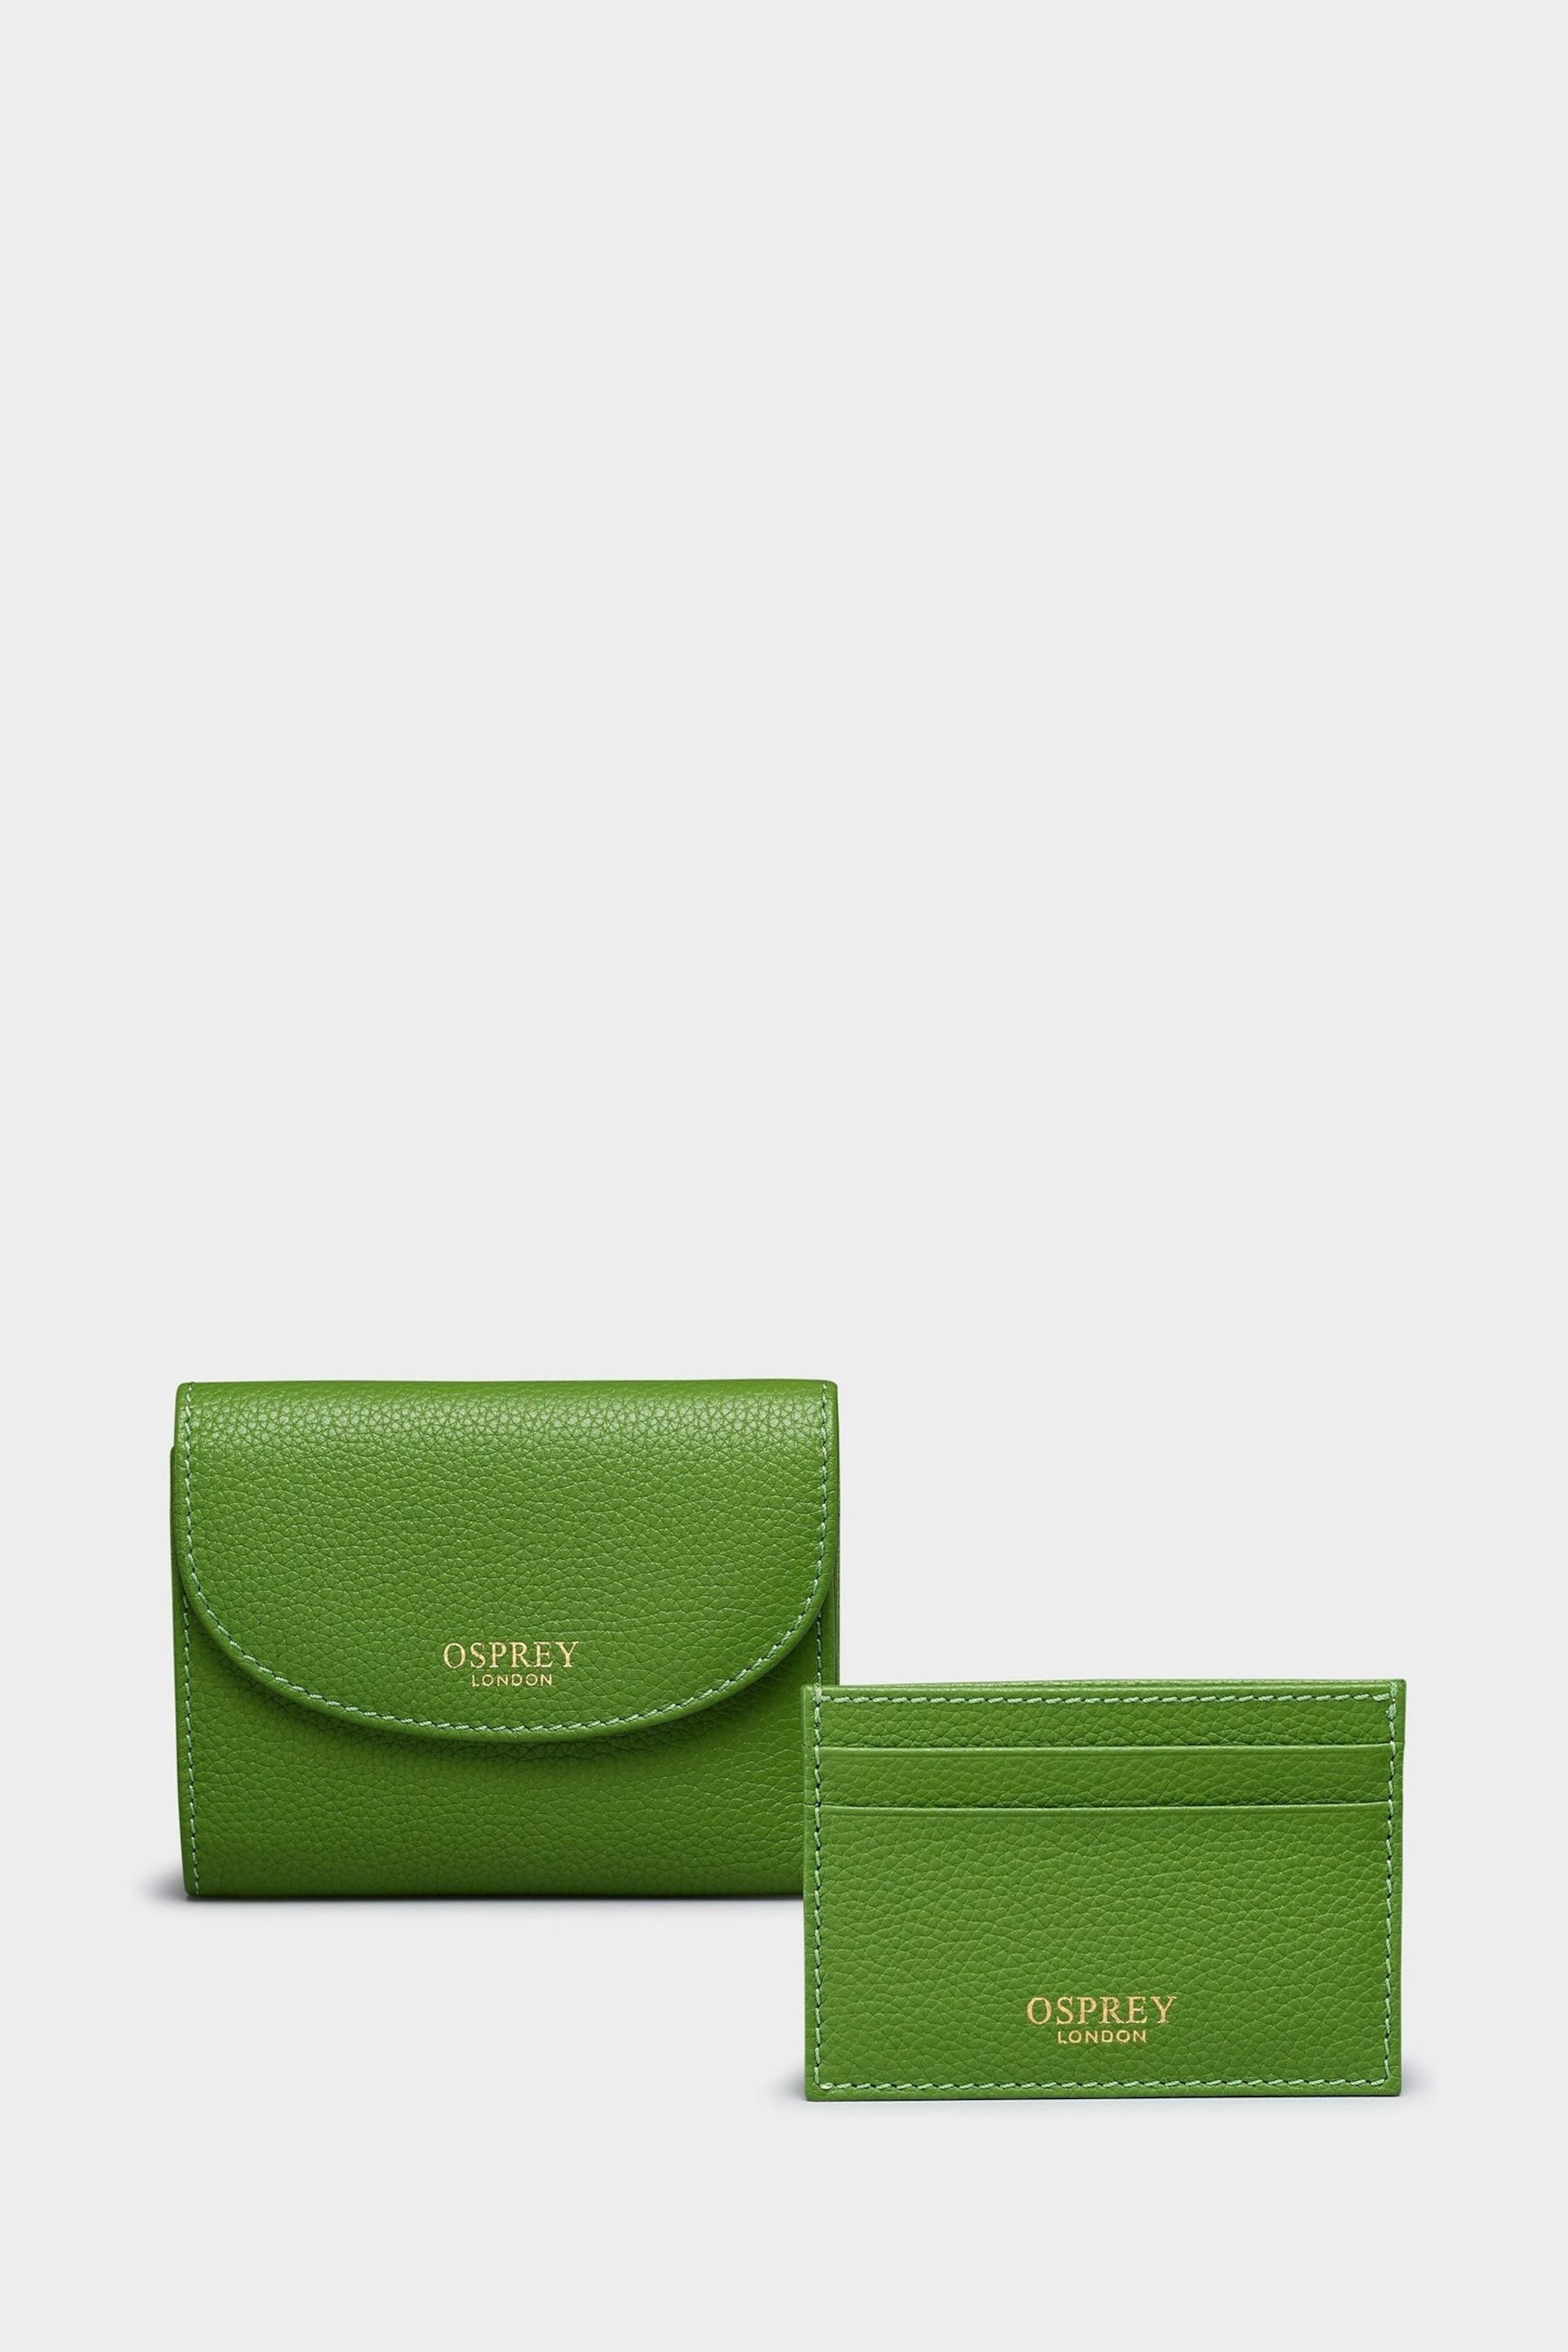 OSPREY LONDON The Tilly Leather Purse Gift Set - Image 3 of 8